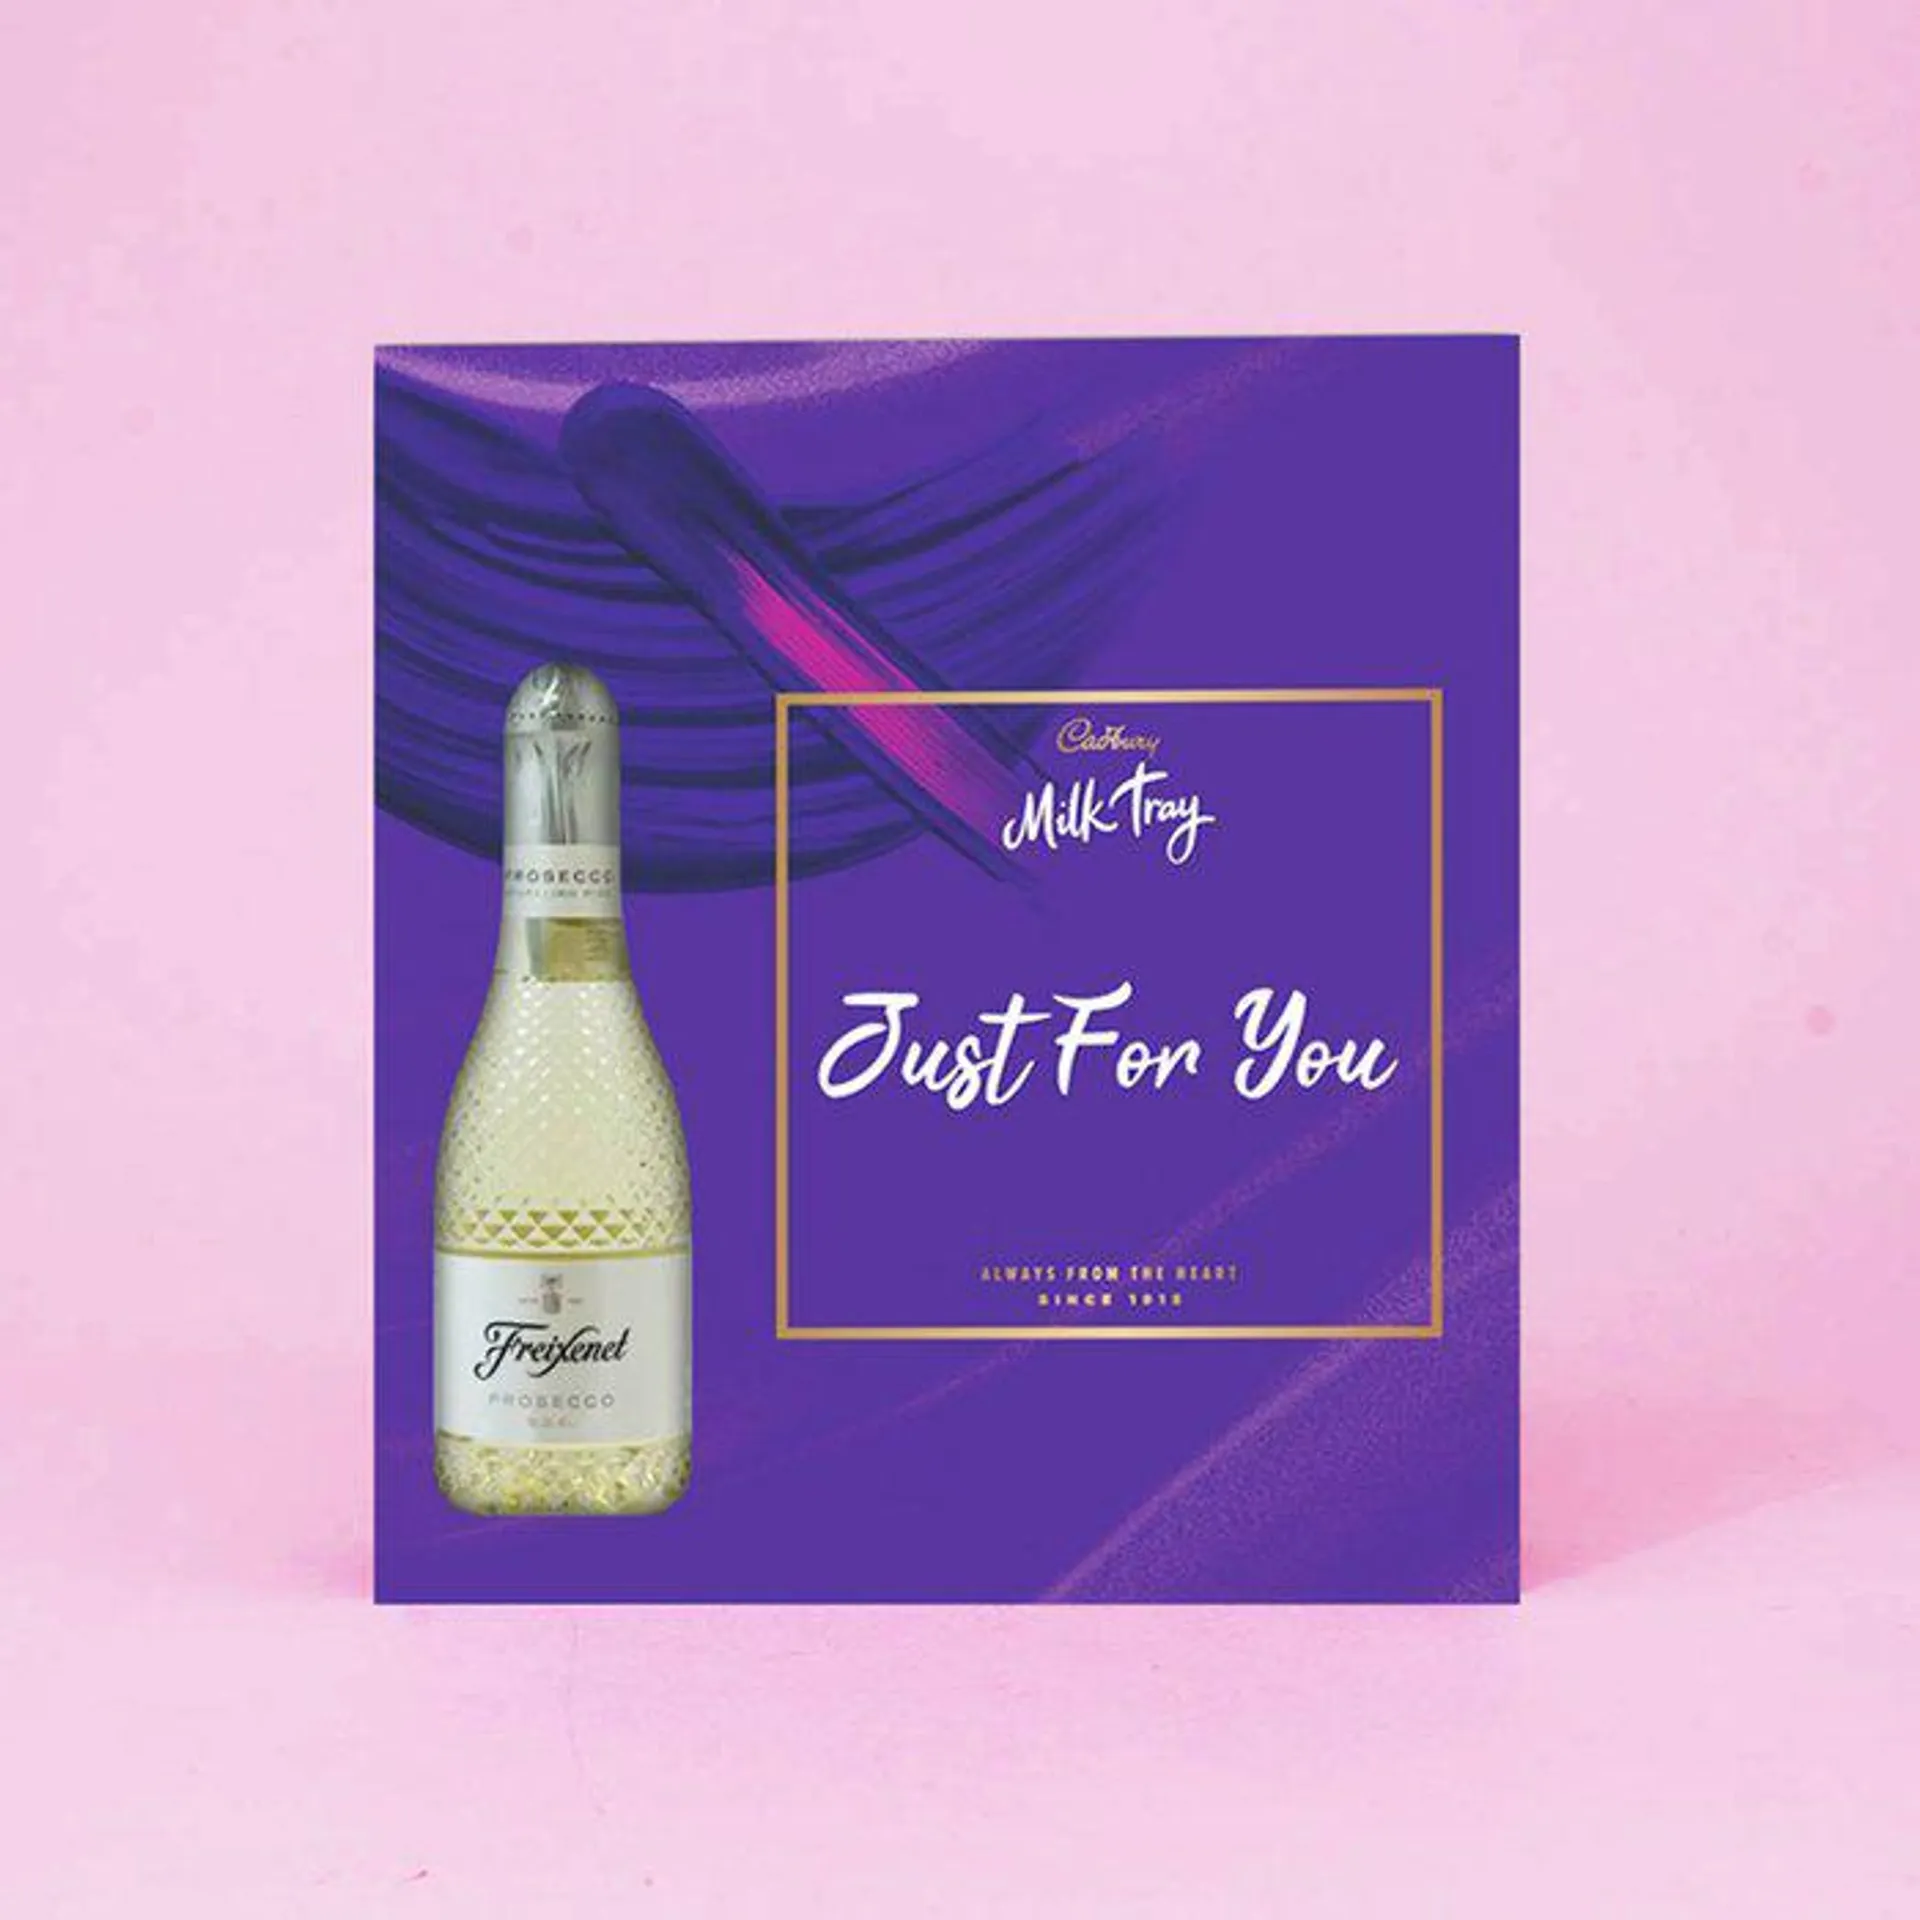 Cadbury Milk Tray 156g & Prosecco 20cl Just for You Gift Set